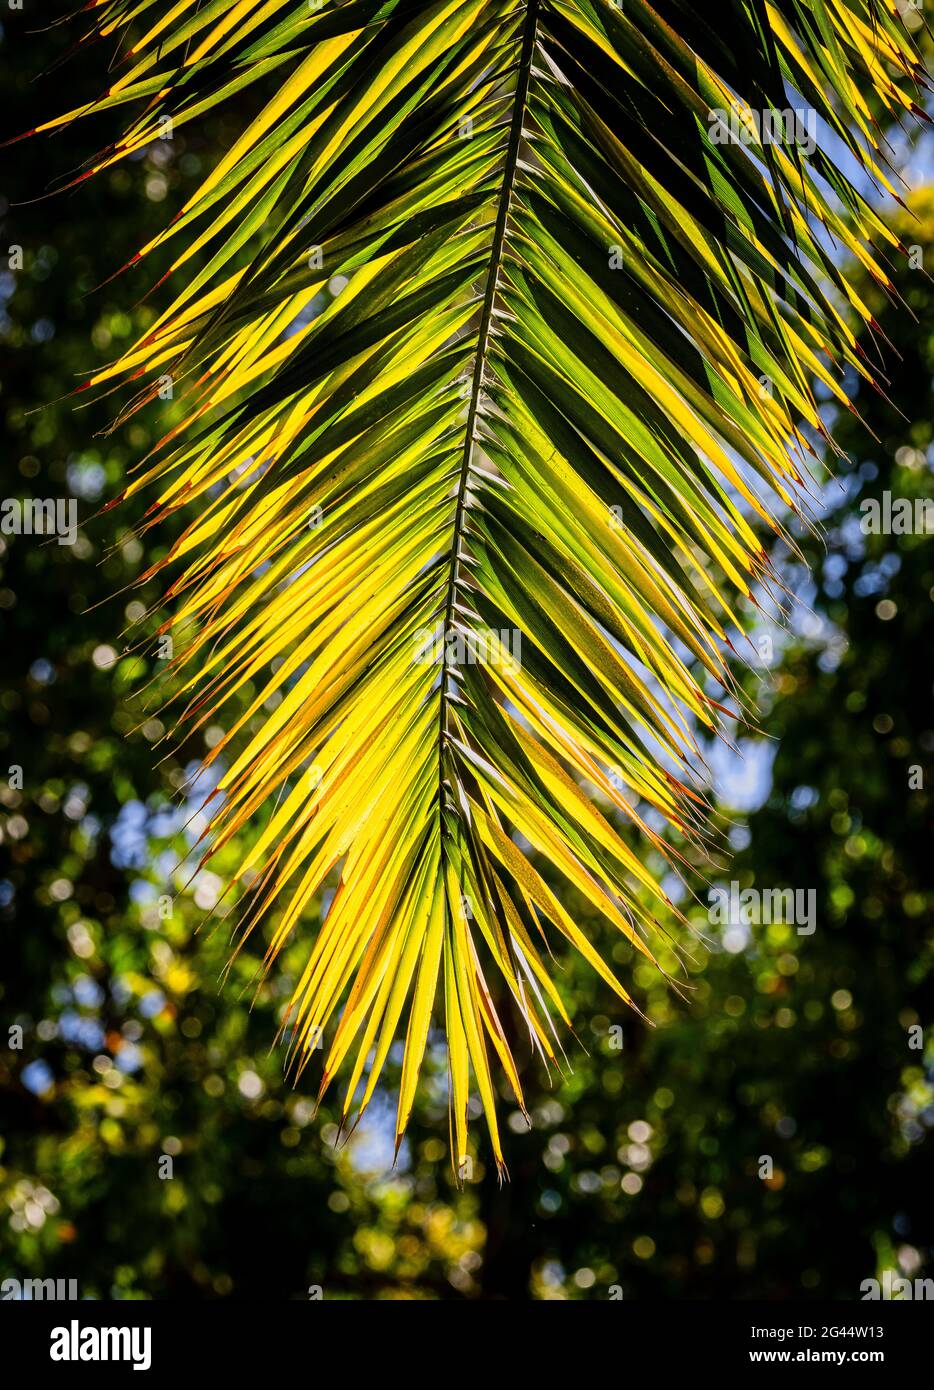 Palm leaf against trees Stock Photo